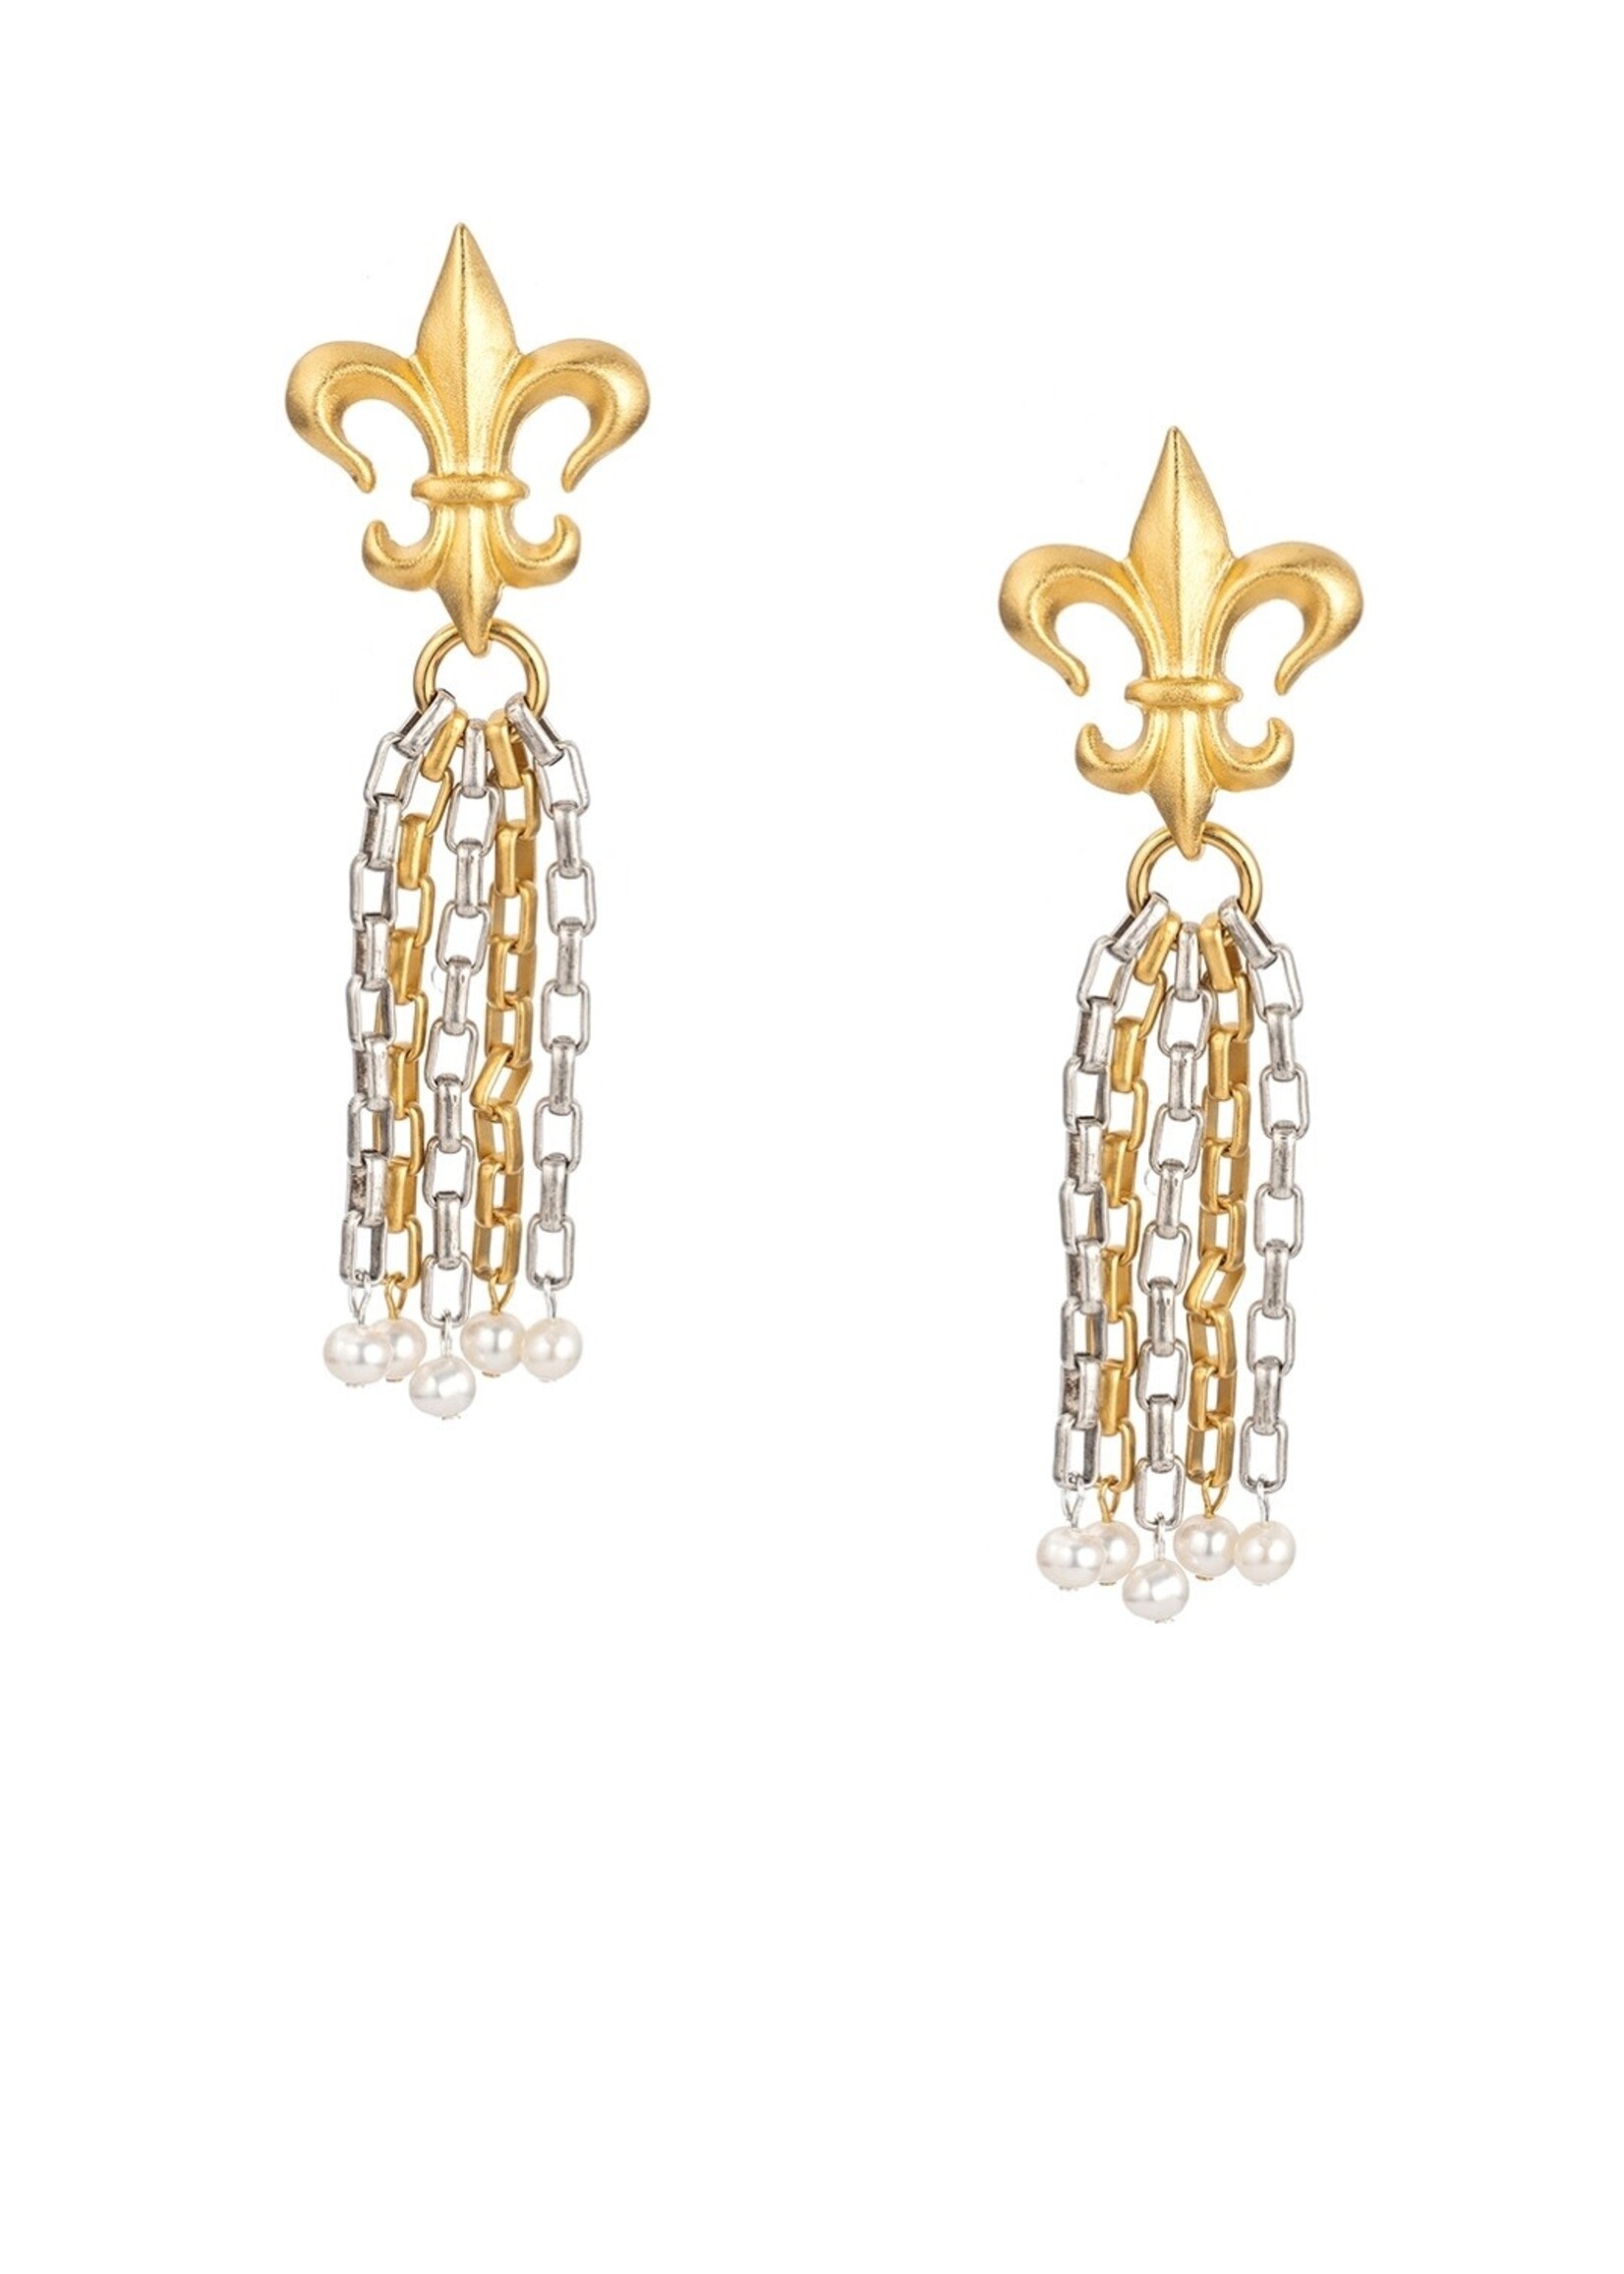 FRENCH KANDE GOLD FLEUR TASSEL EARRINGS WITH MICRO PEARLS